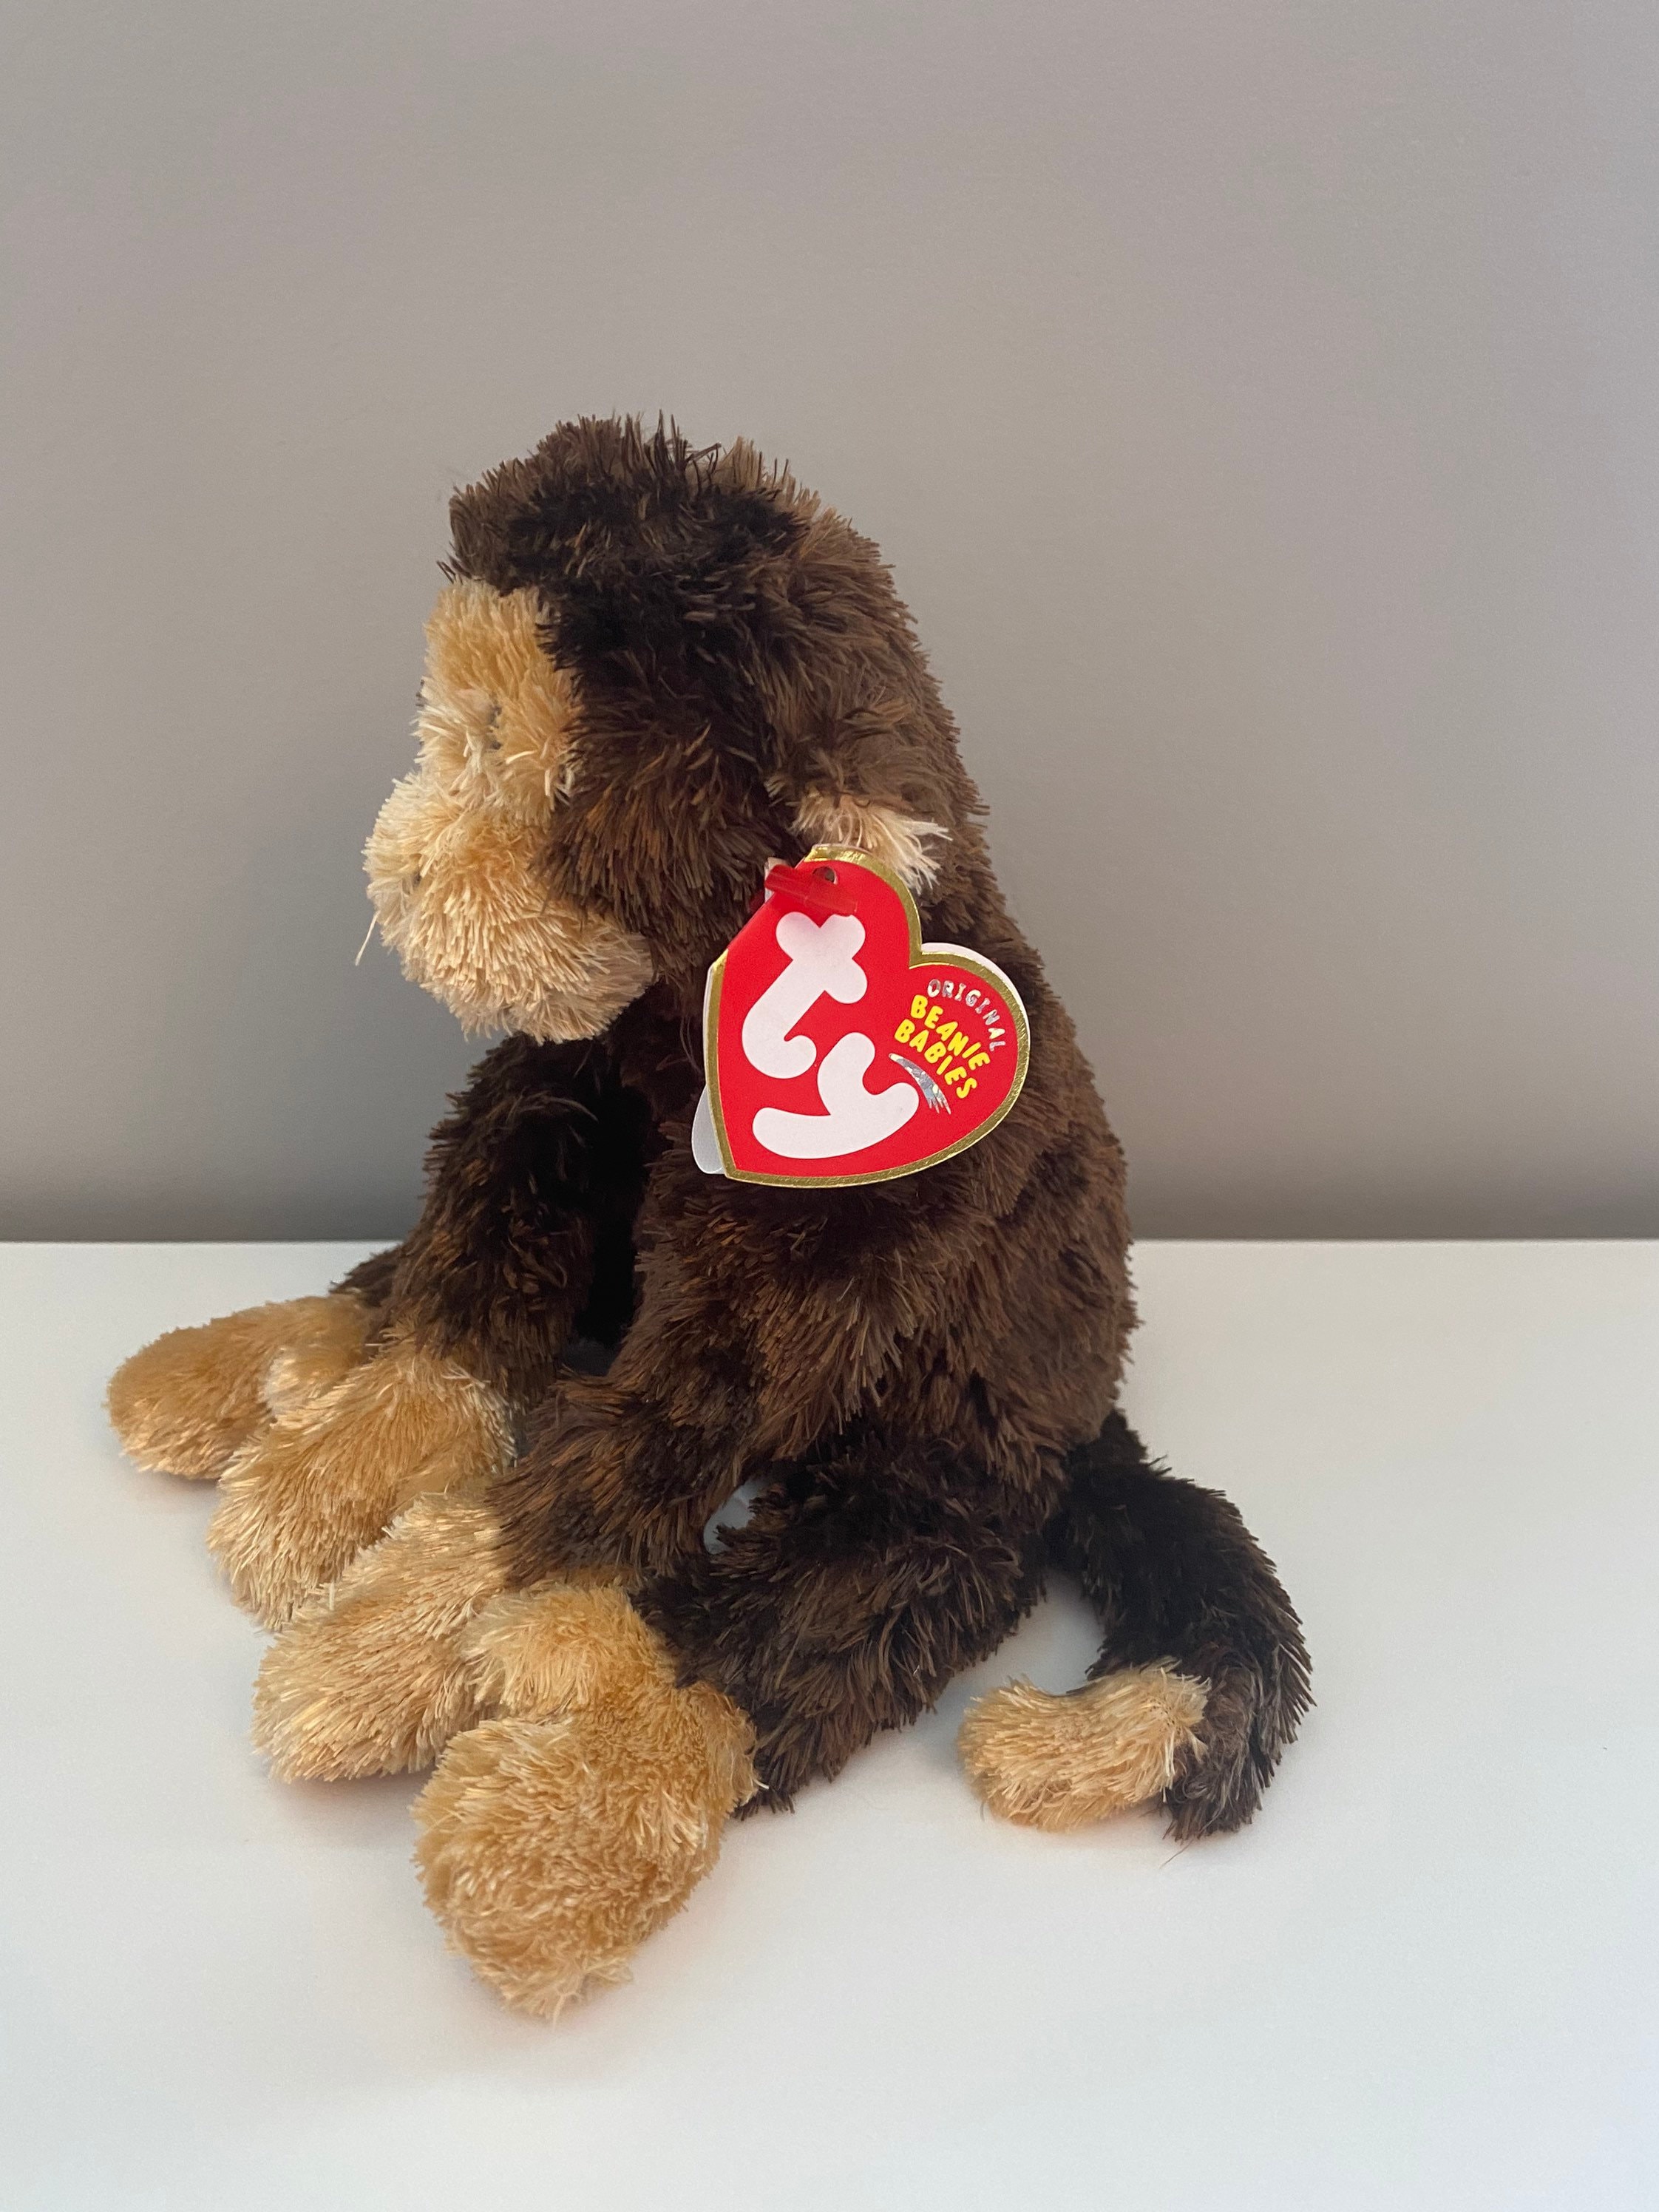 Ty Beanie Baby swinger the Monkey 9 Inch image pic